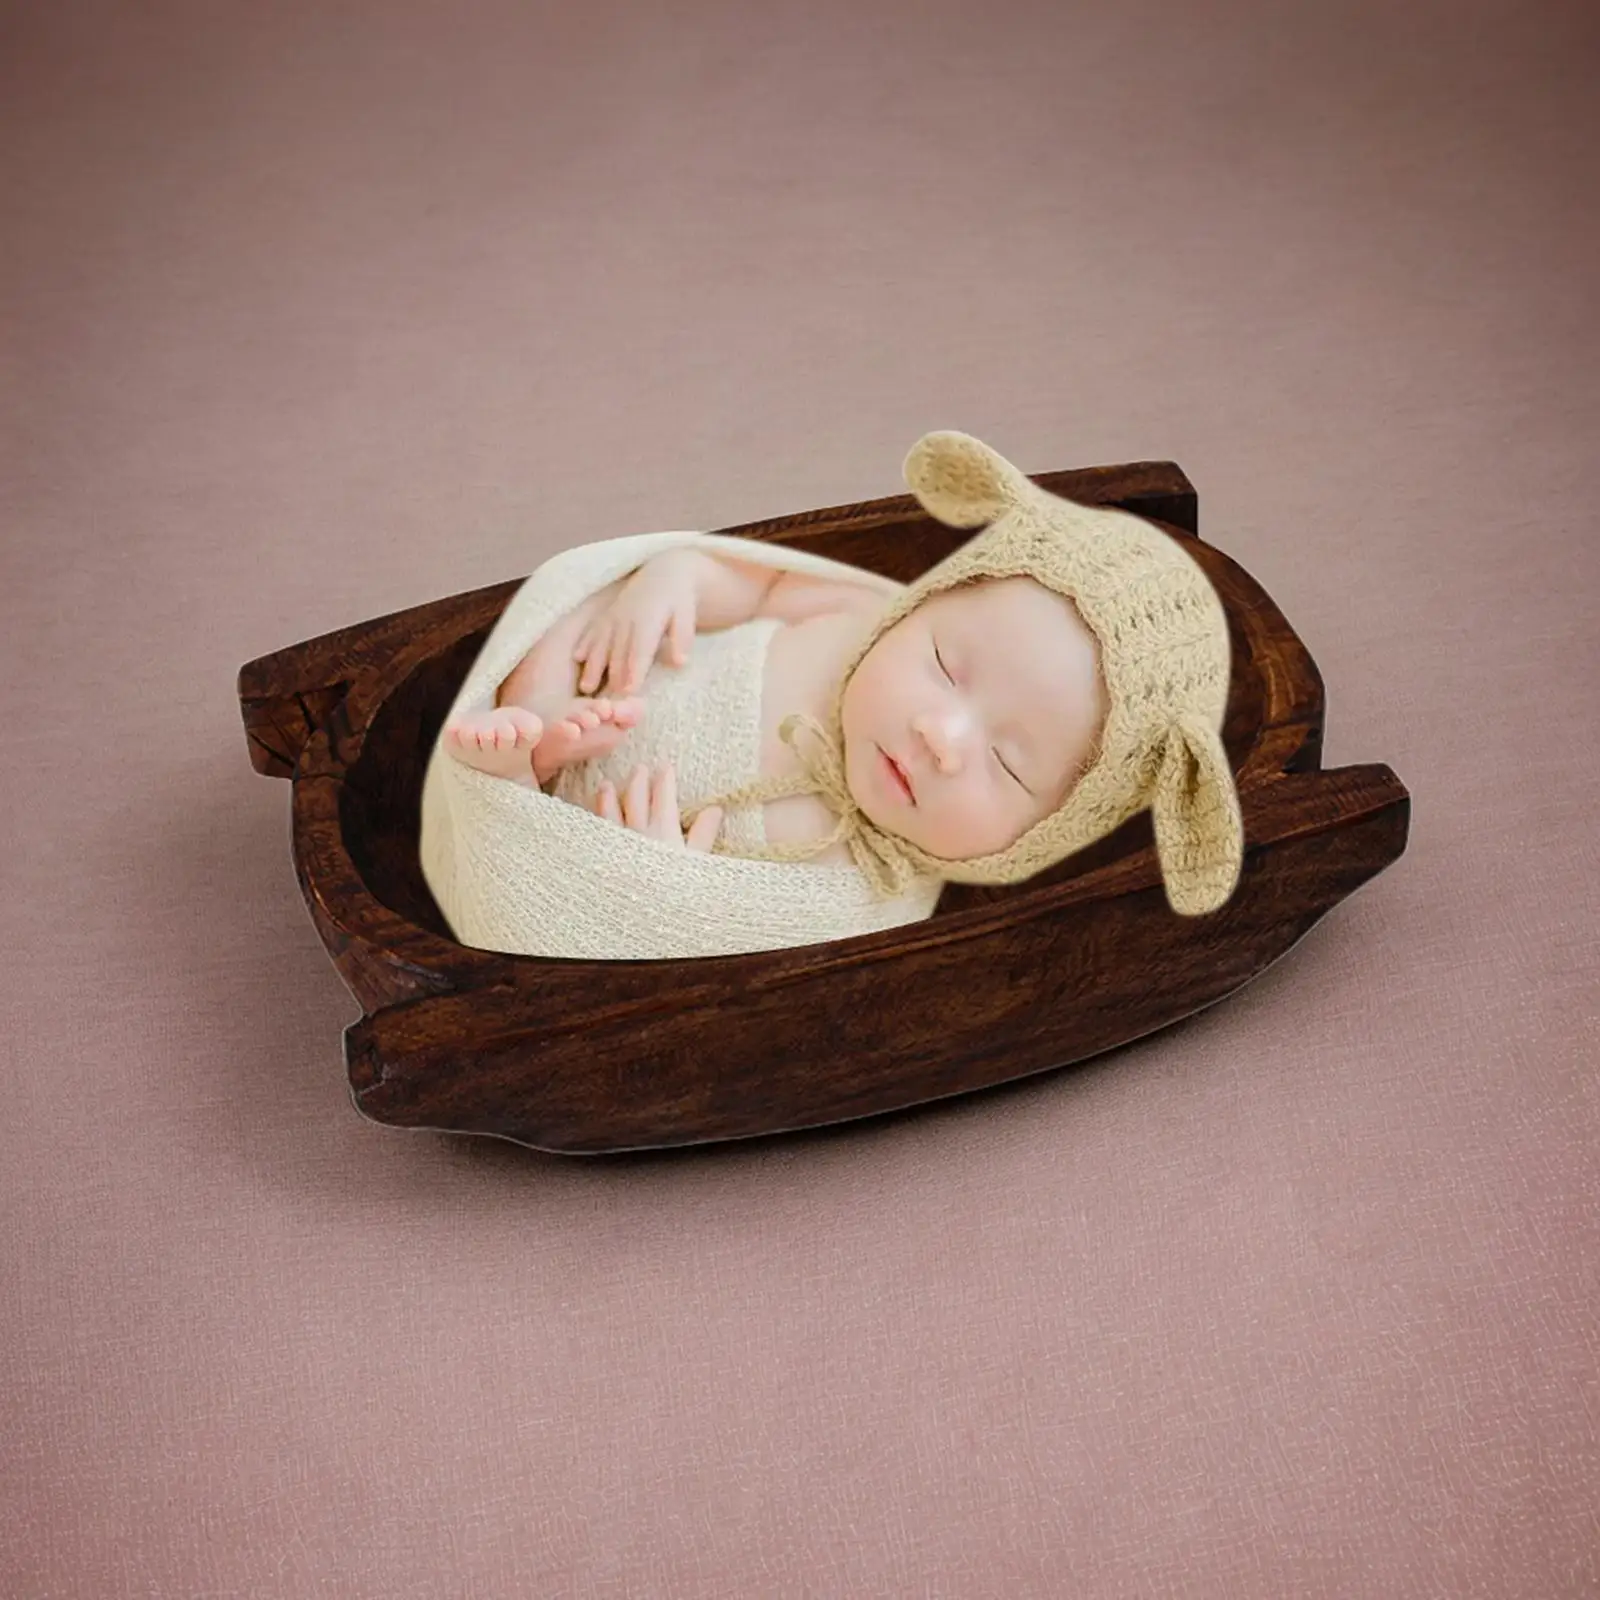 Baby Photography Prop Decor Wooden Bowl Small Couch Accessory Seat Bed for Monthly Baby Baby Girls Boys Newborn Birthday Decor